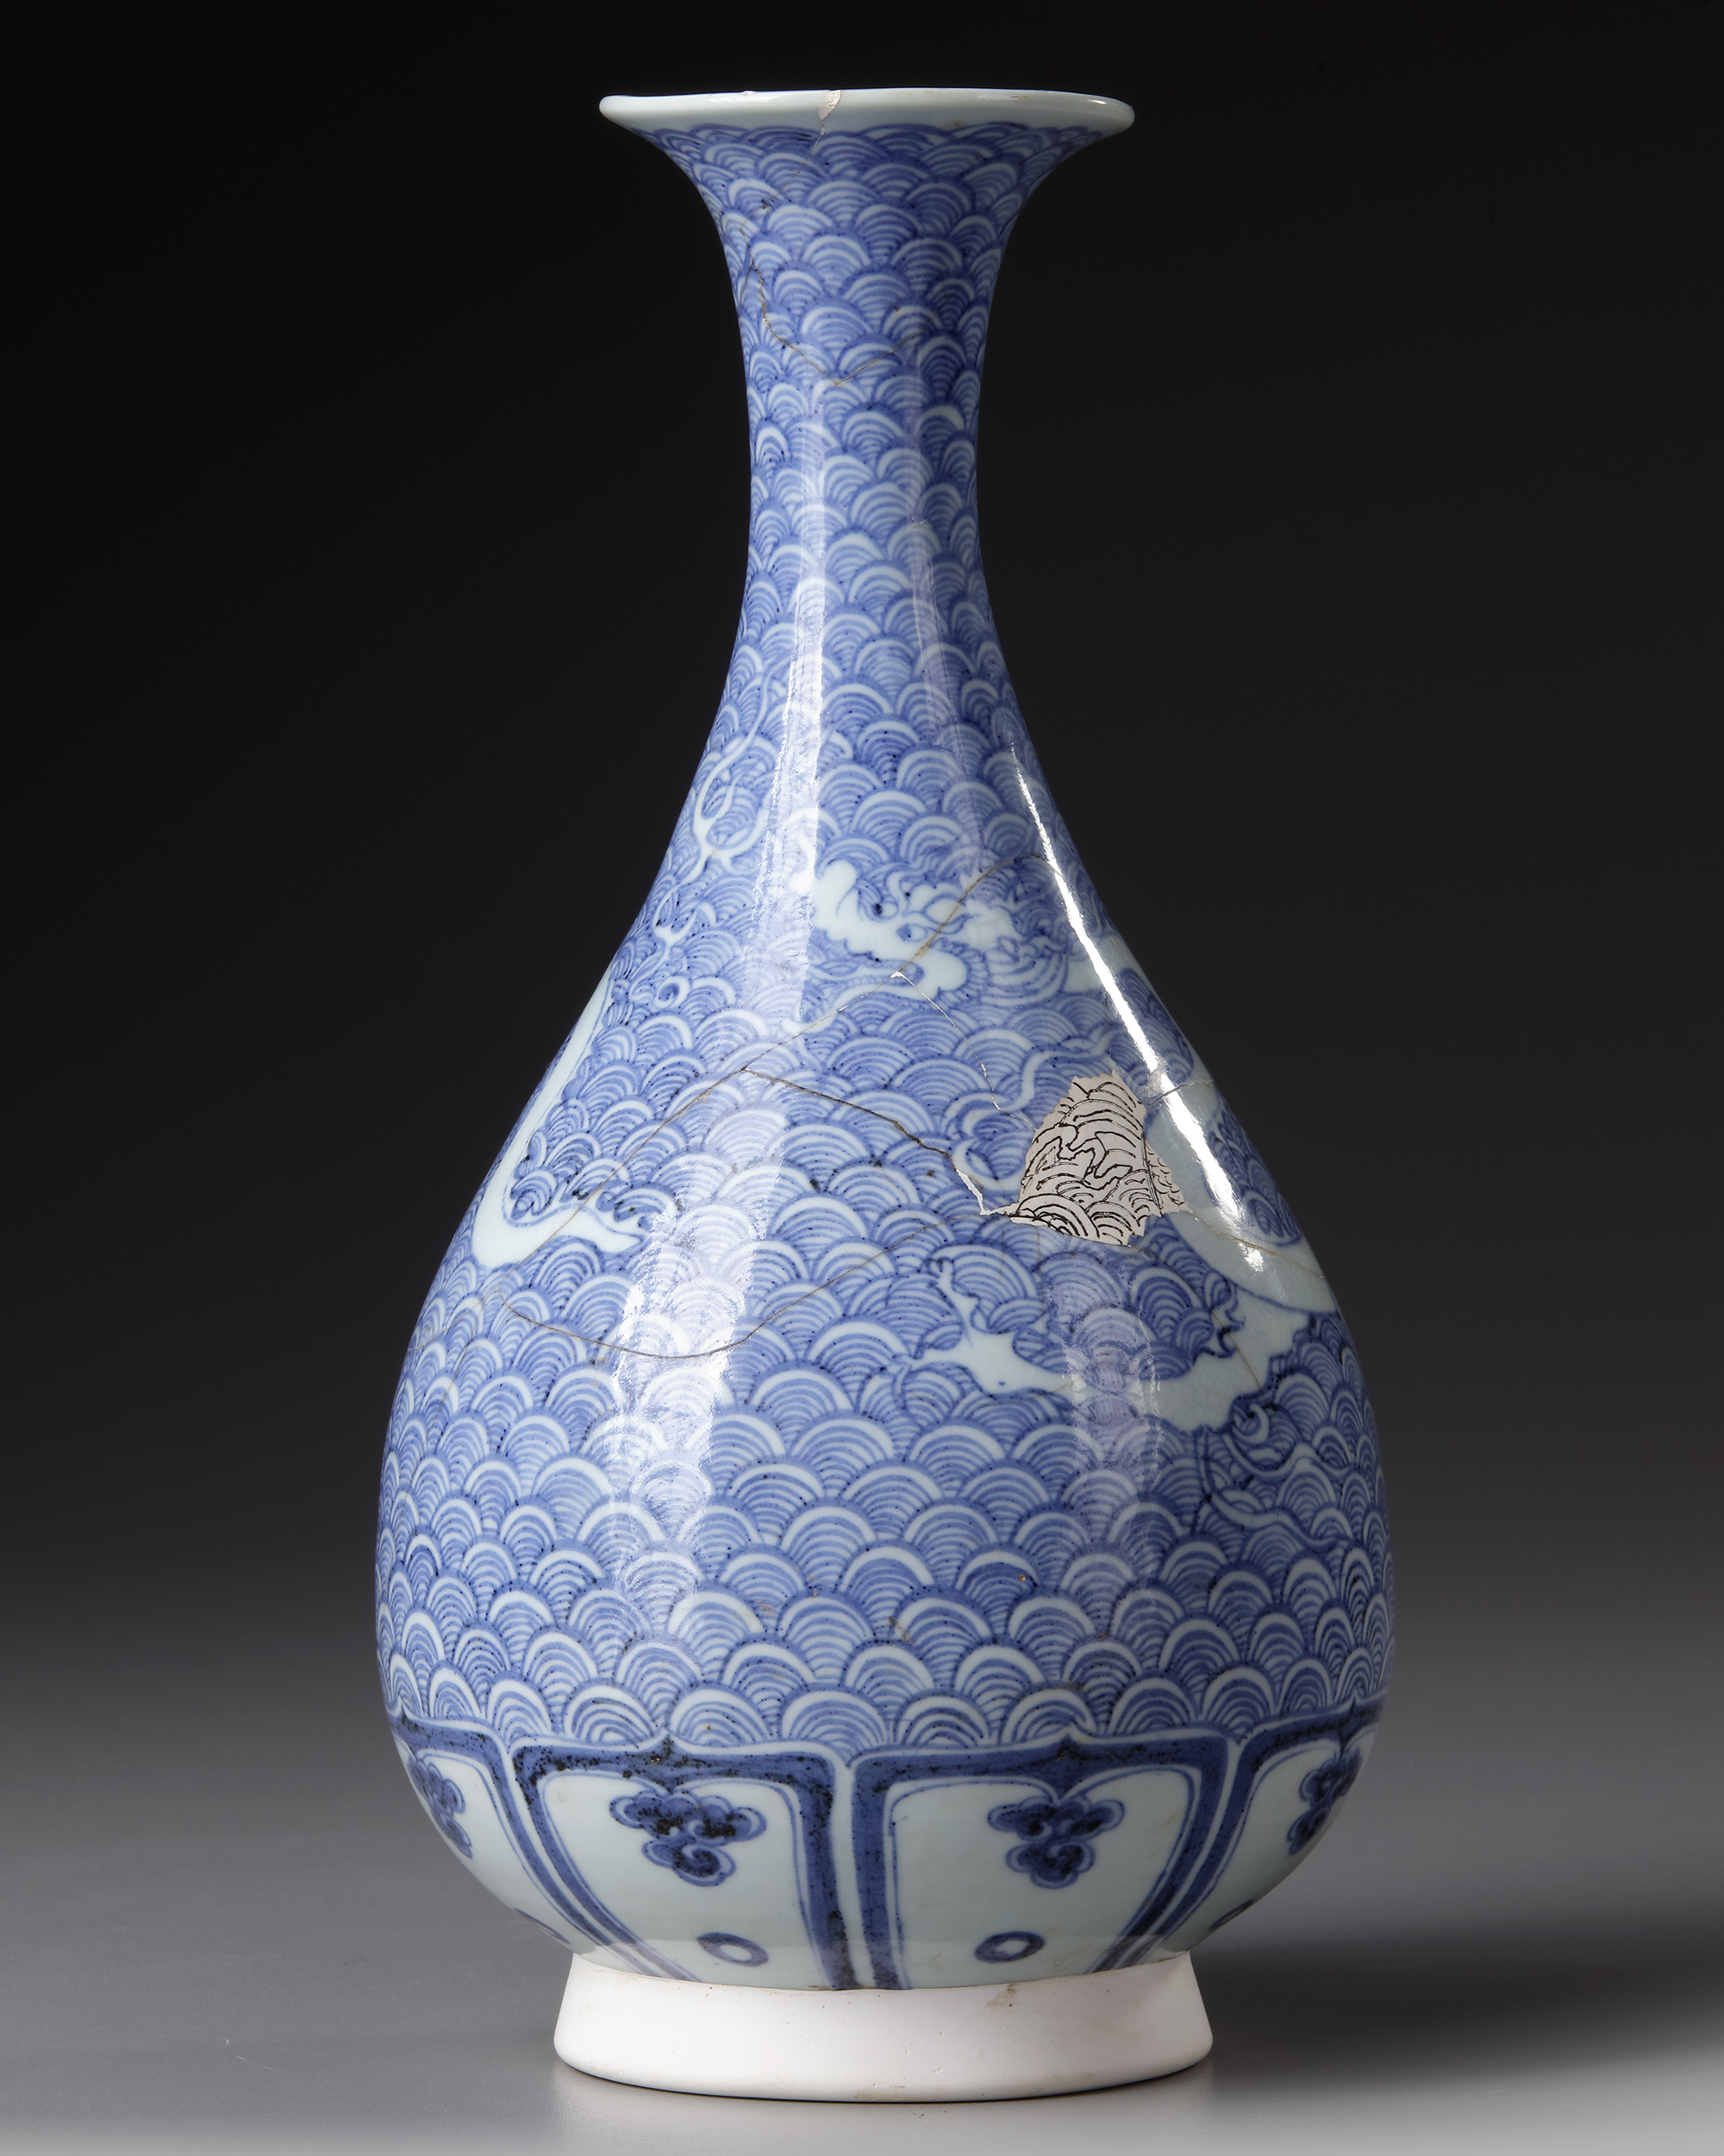 A CHINESE BLUE AND WHITE DRAGON VASE, QING DYNASTY (1644–1911)